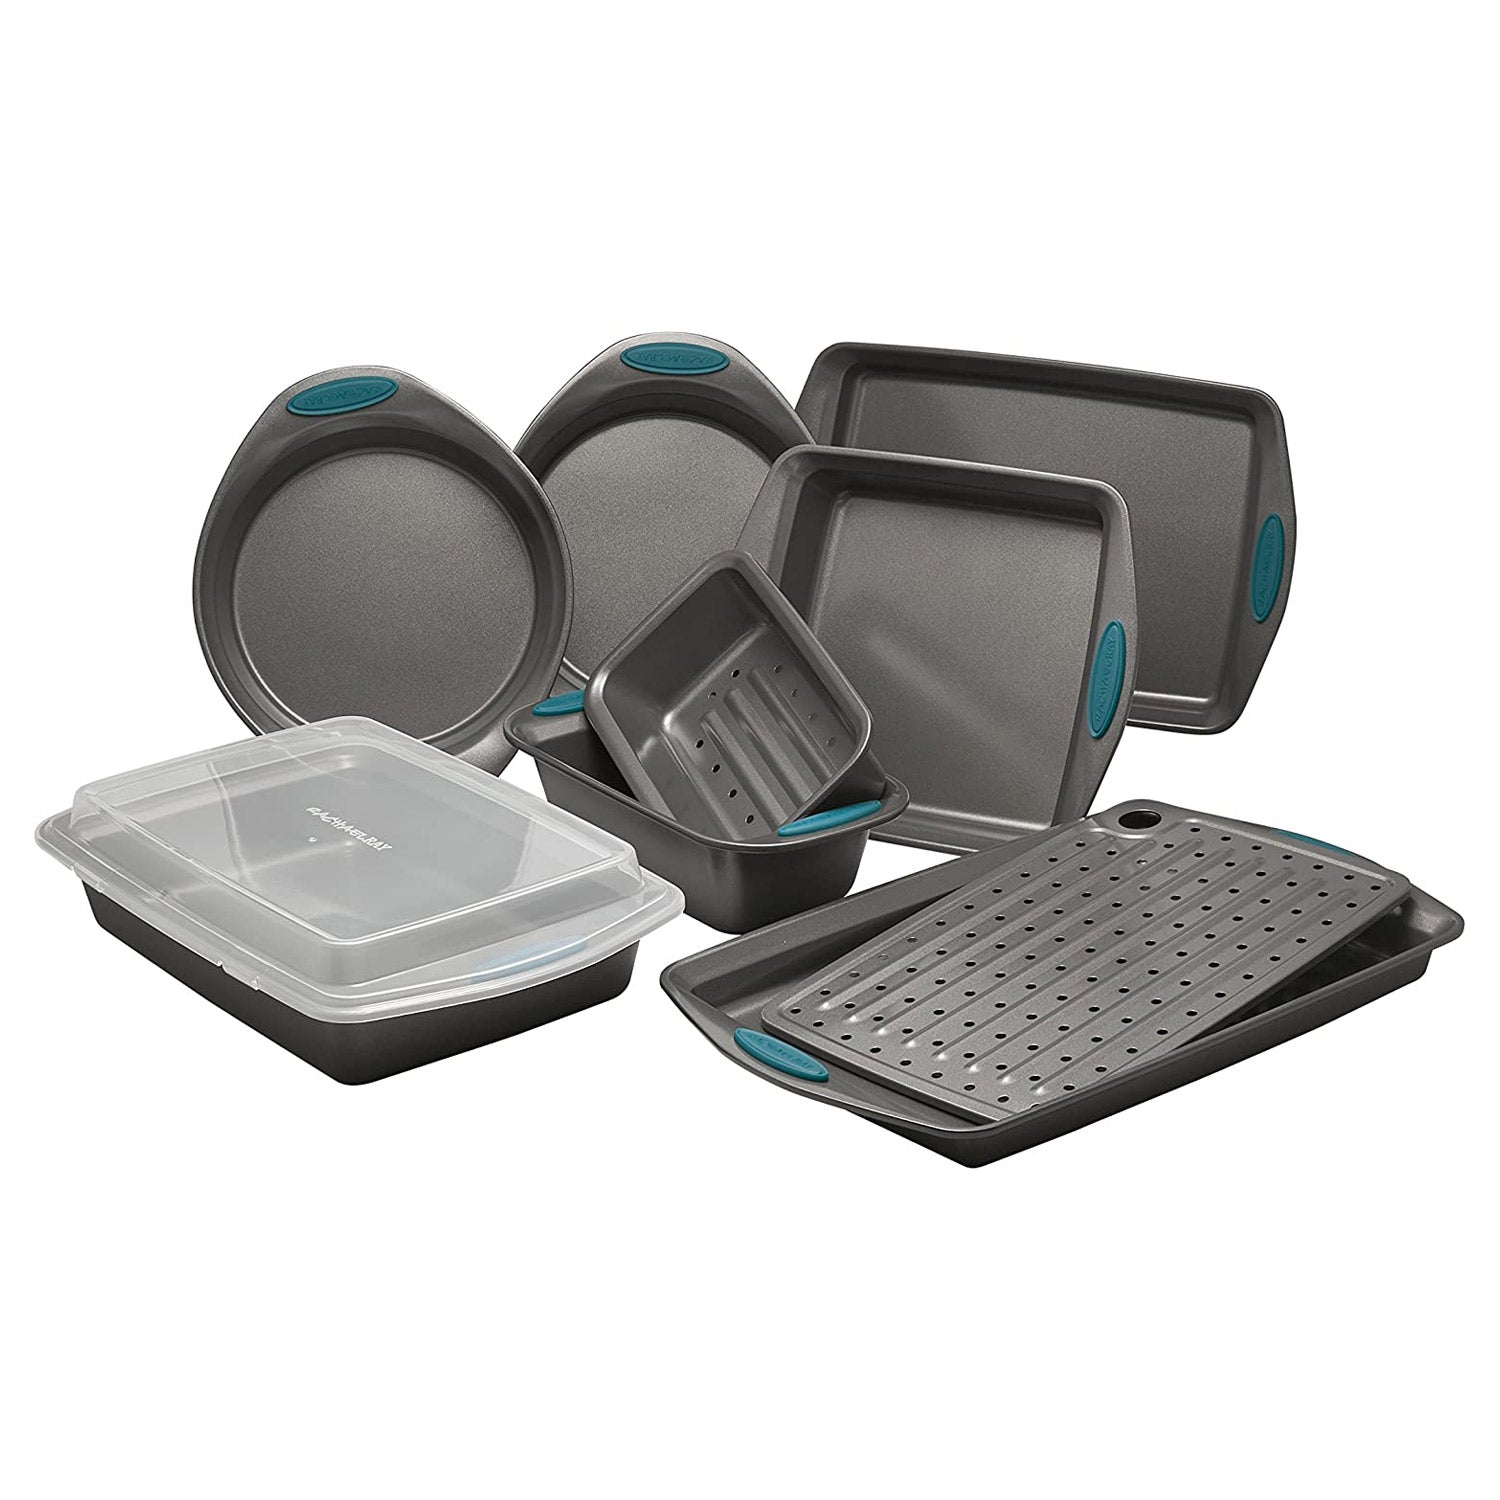 Rachael Ray Nonstick 3-Piece Bakeware Cookie Pan Set - Gray with Red Grips